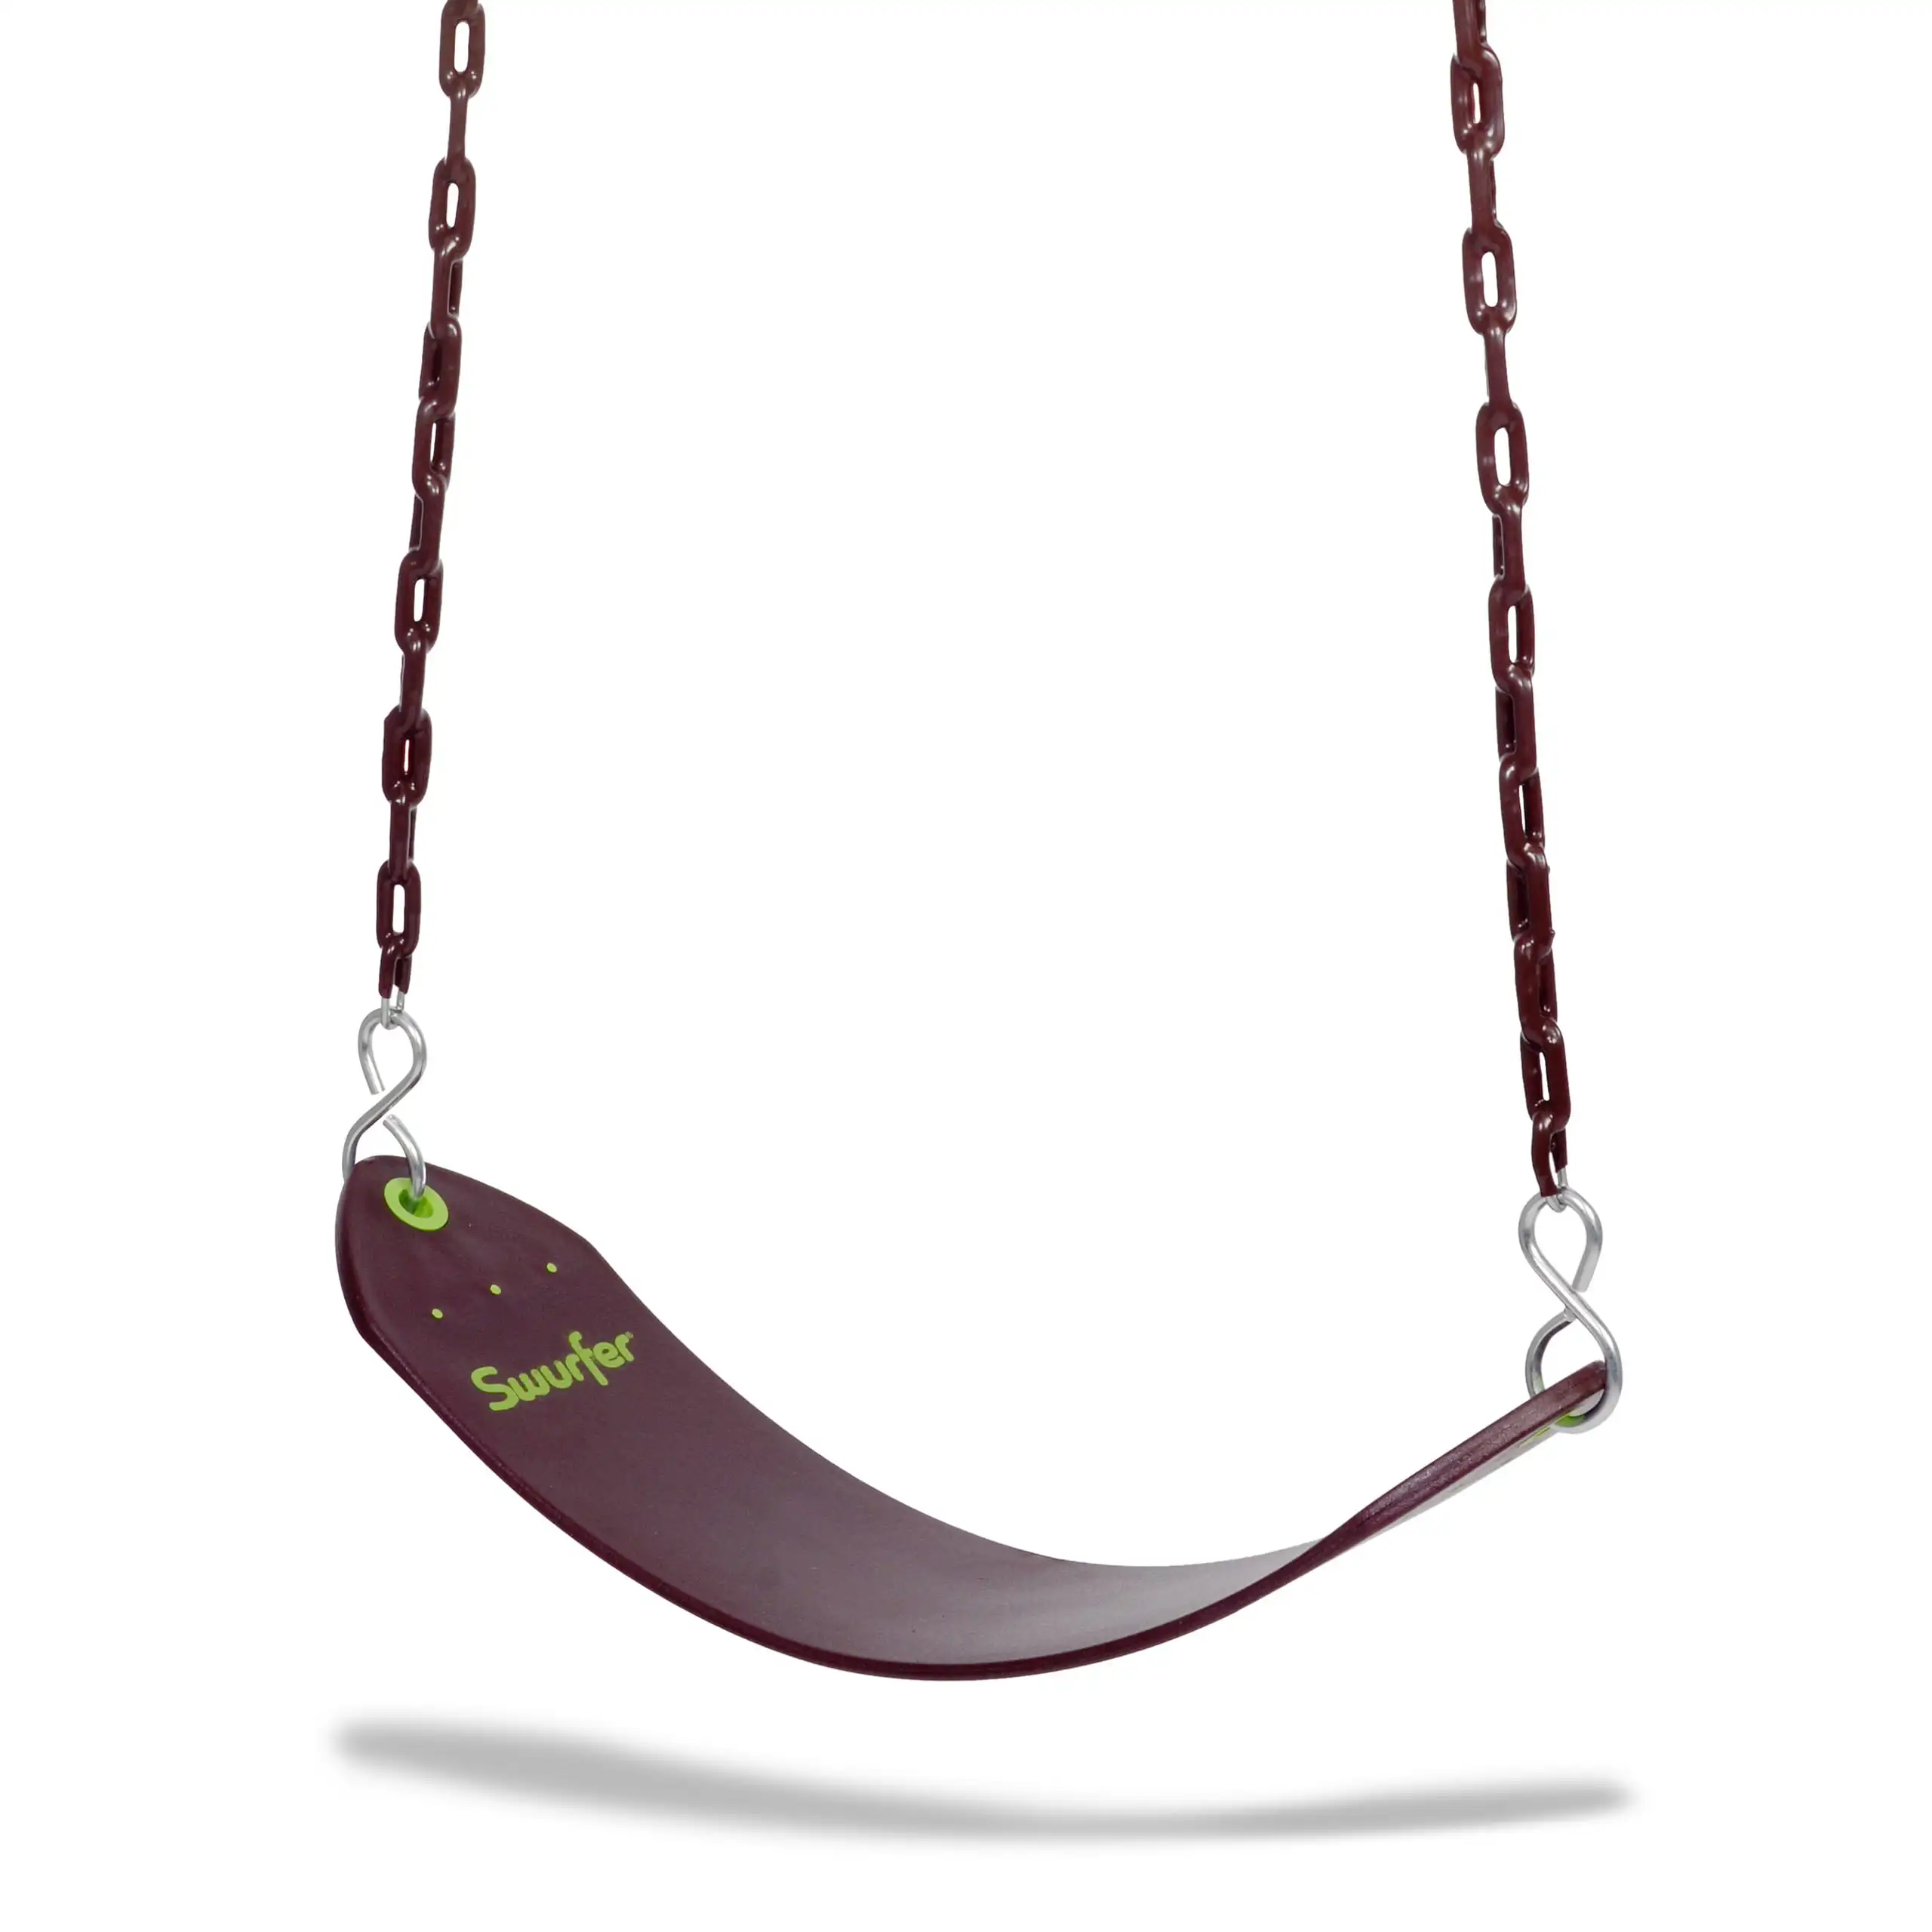 Belt Swing with Pinch-Free Rubber Coated Metal Hanging Chains Holds 250 Pounds Ages 4 and Up